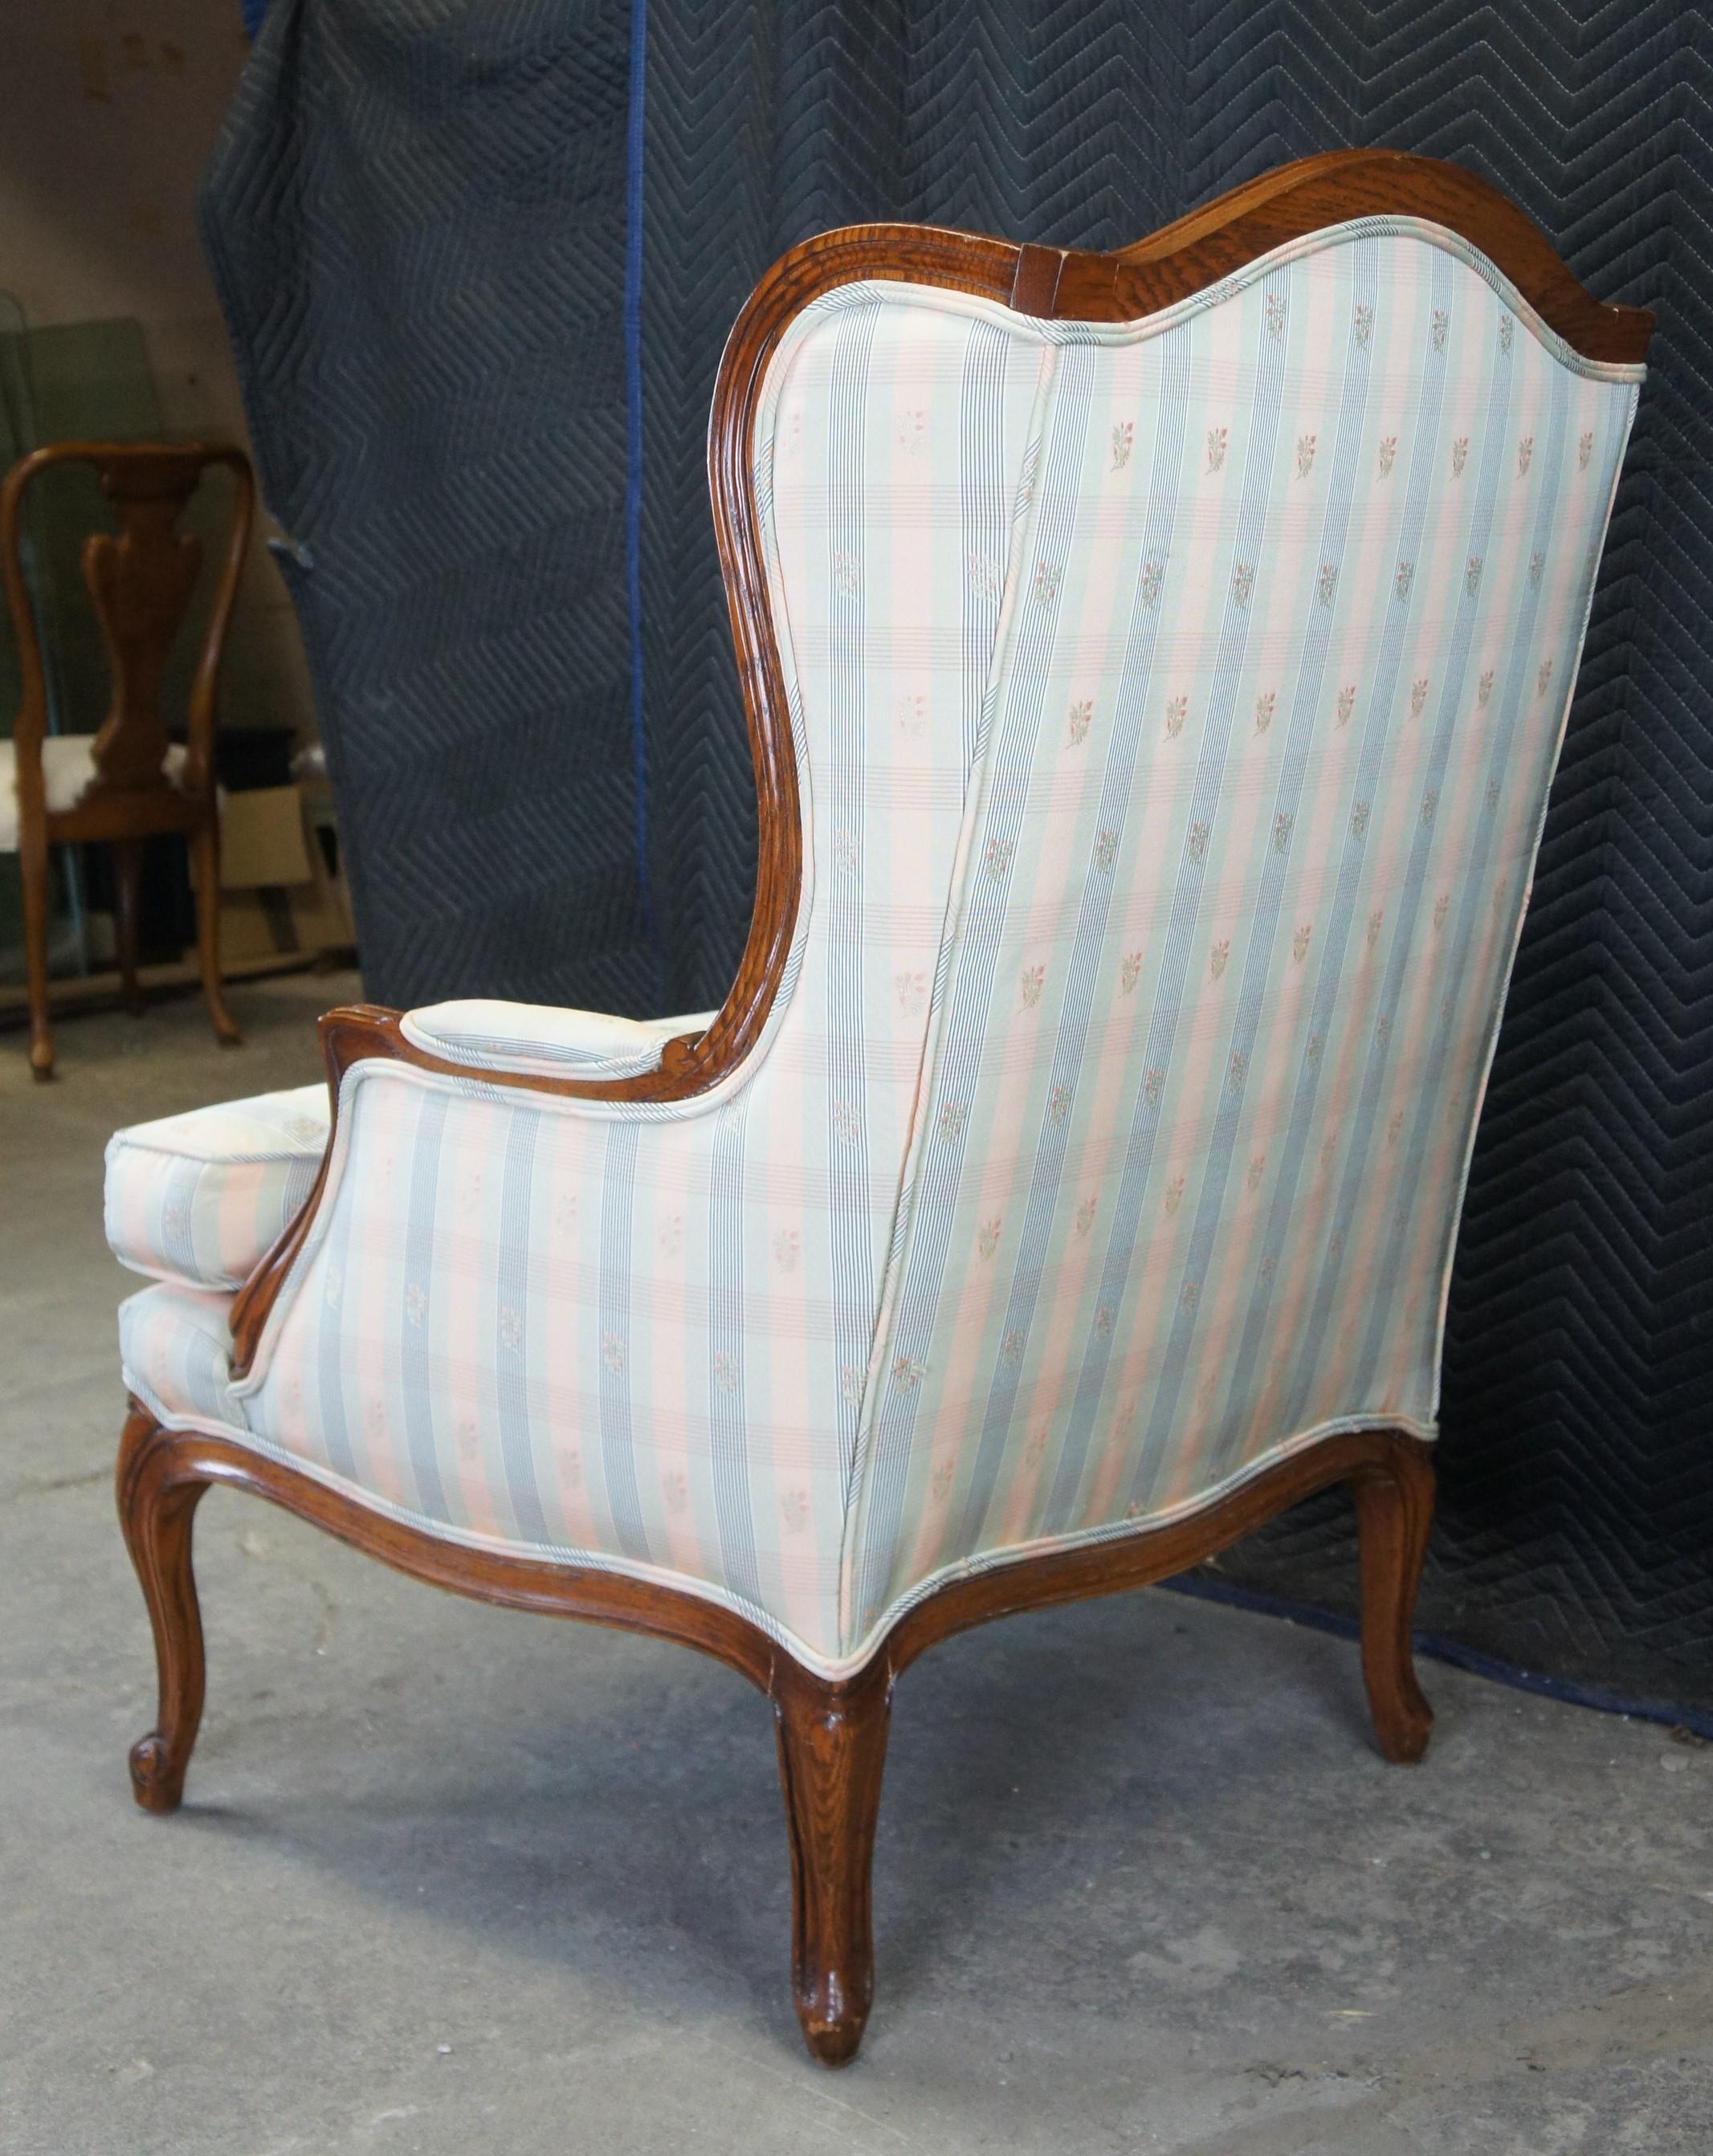 French Provincial 2 Baker Louis XV French Country Bergere Wingback Chairs Scalamandre Plaid